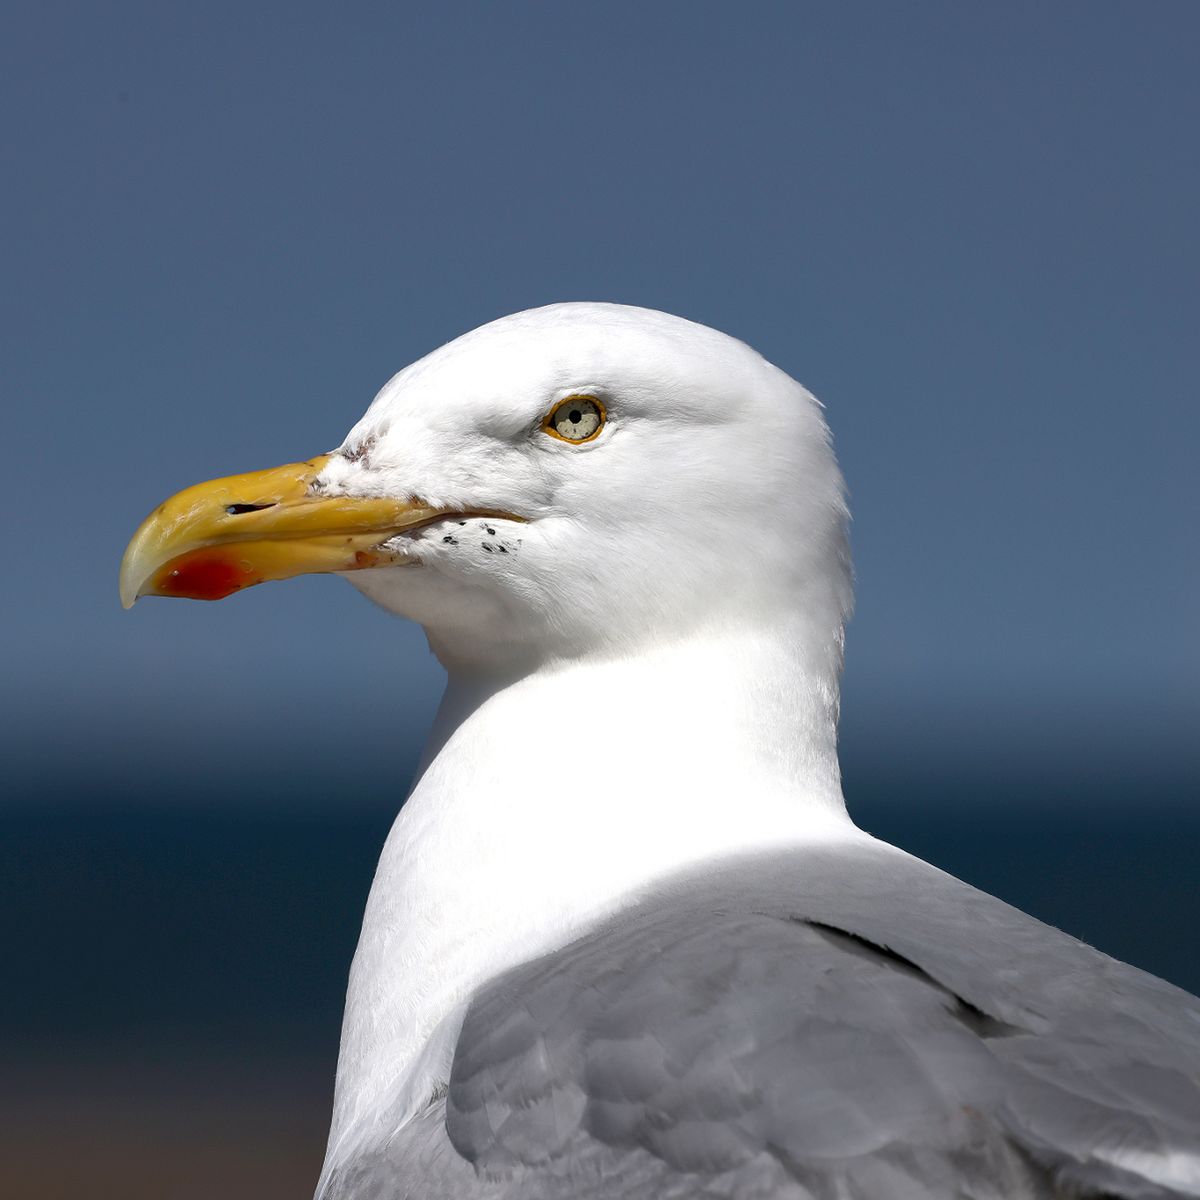 Seagulls high after stealing drugs from beachgoers